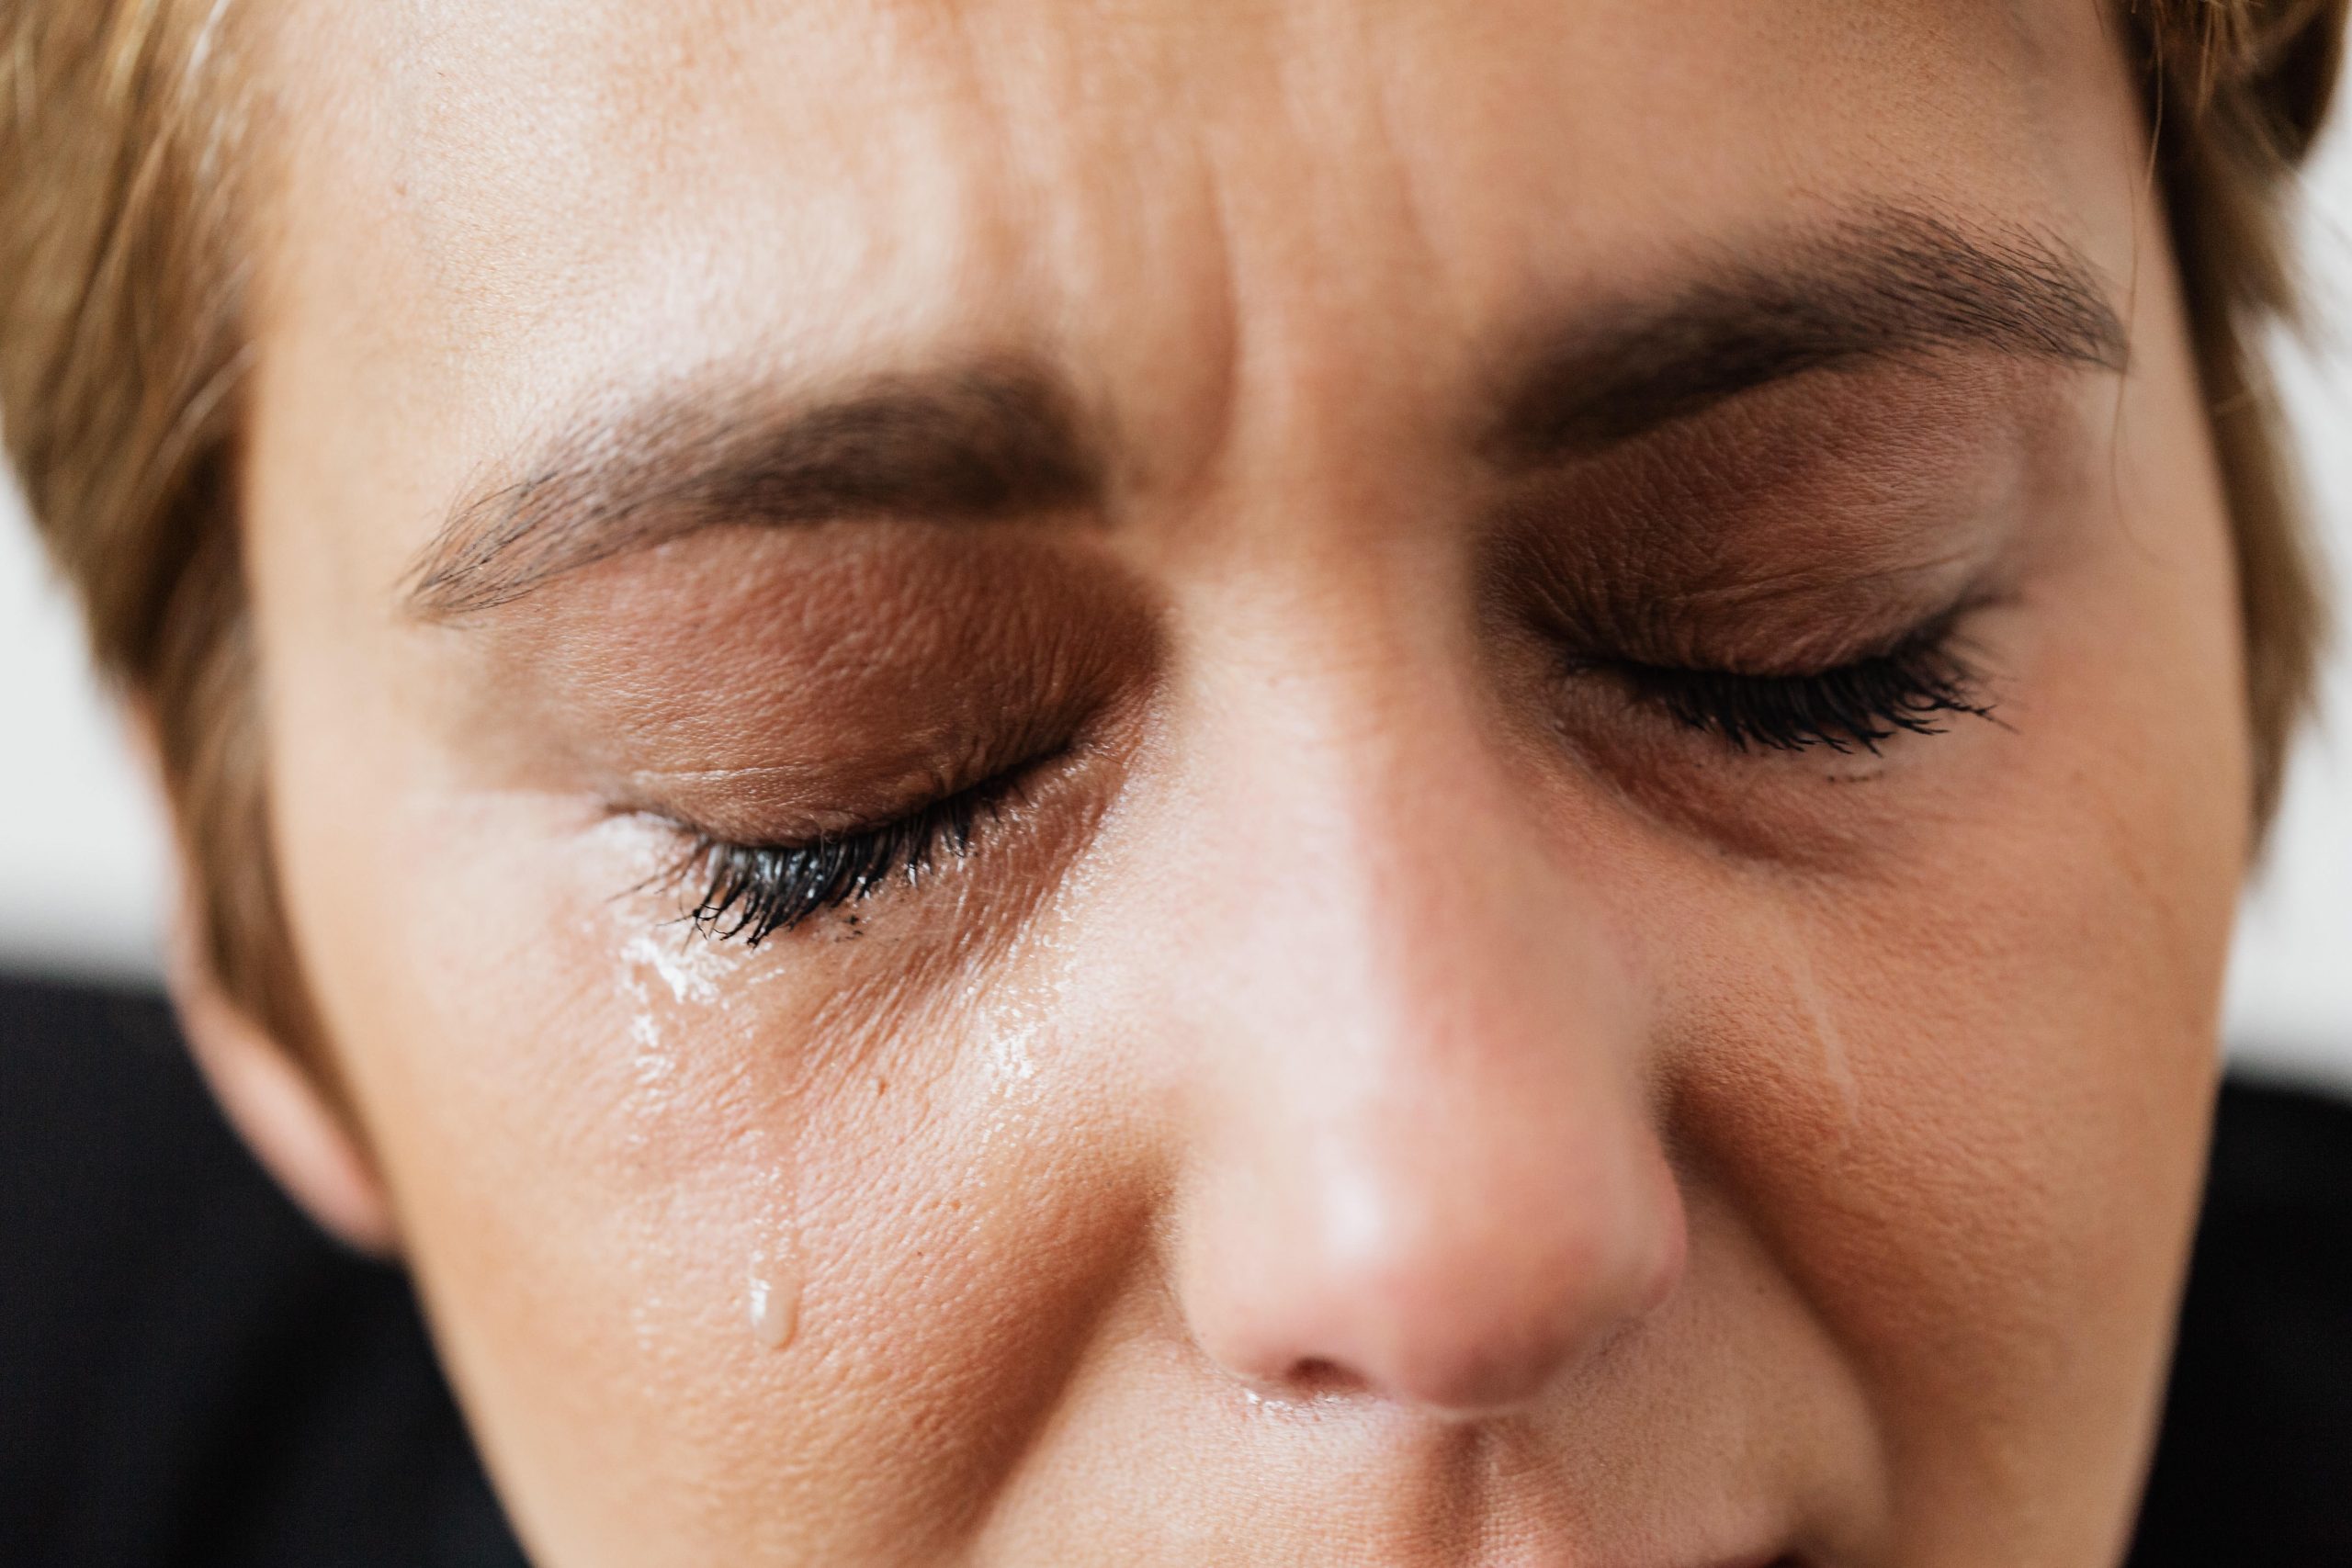 a woman closes her eyes with tear tracks running down her face.